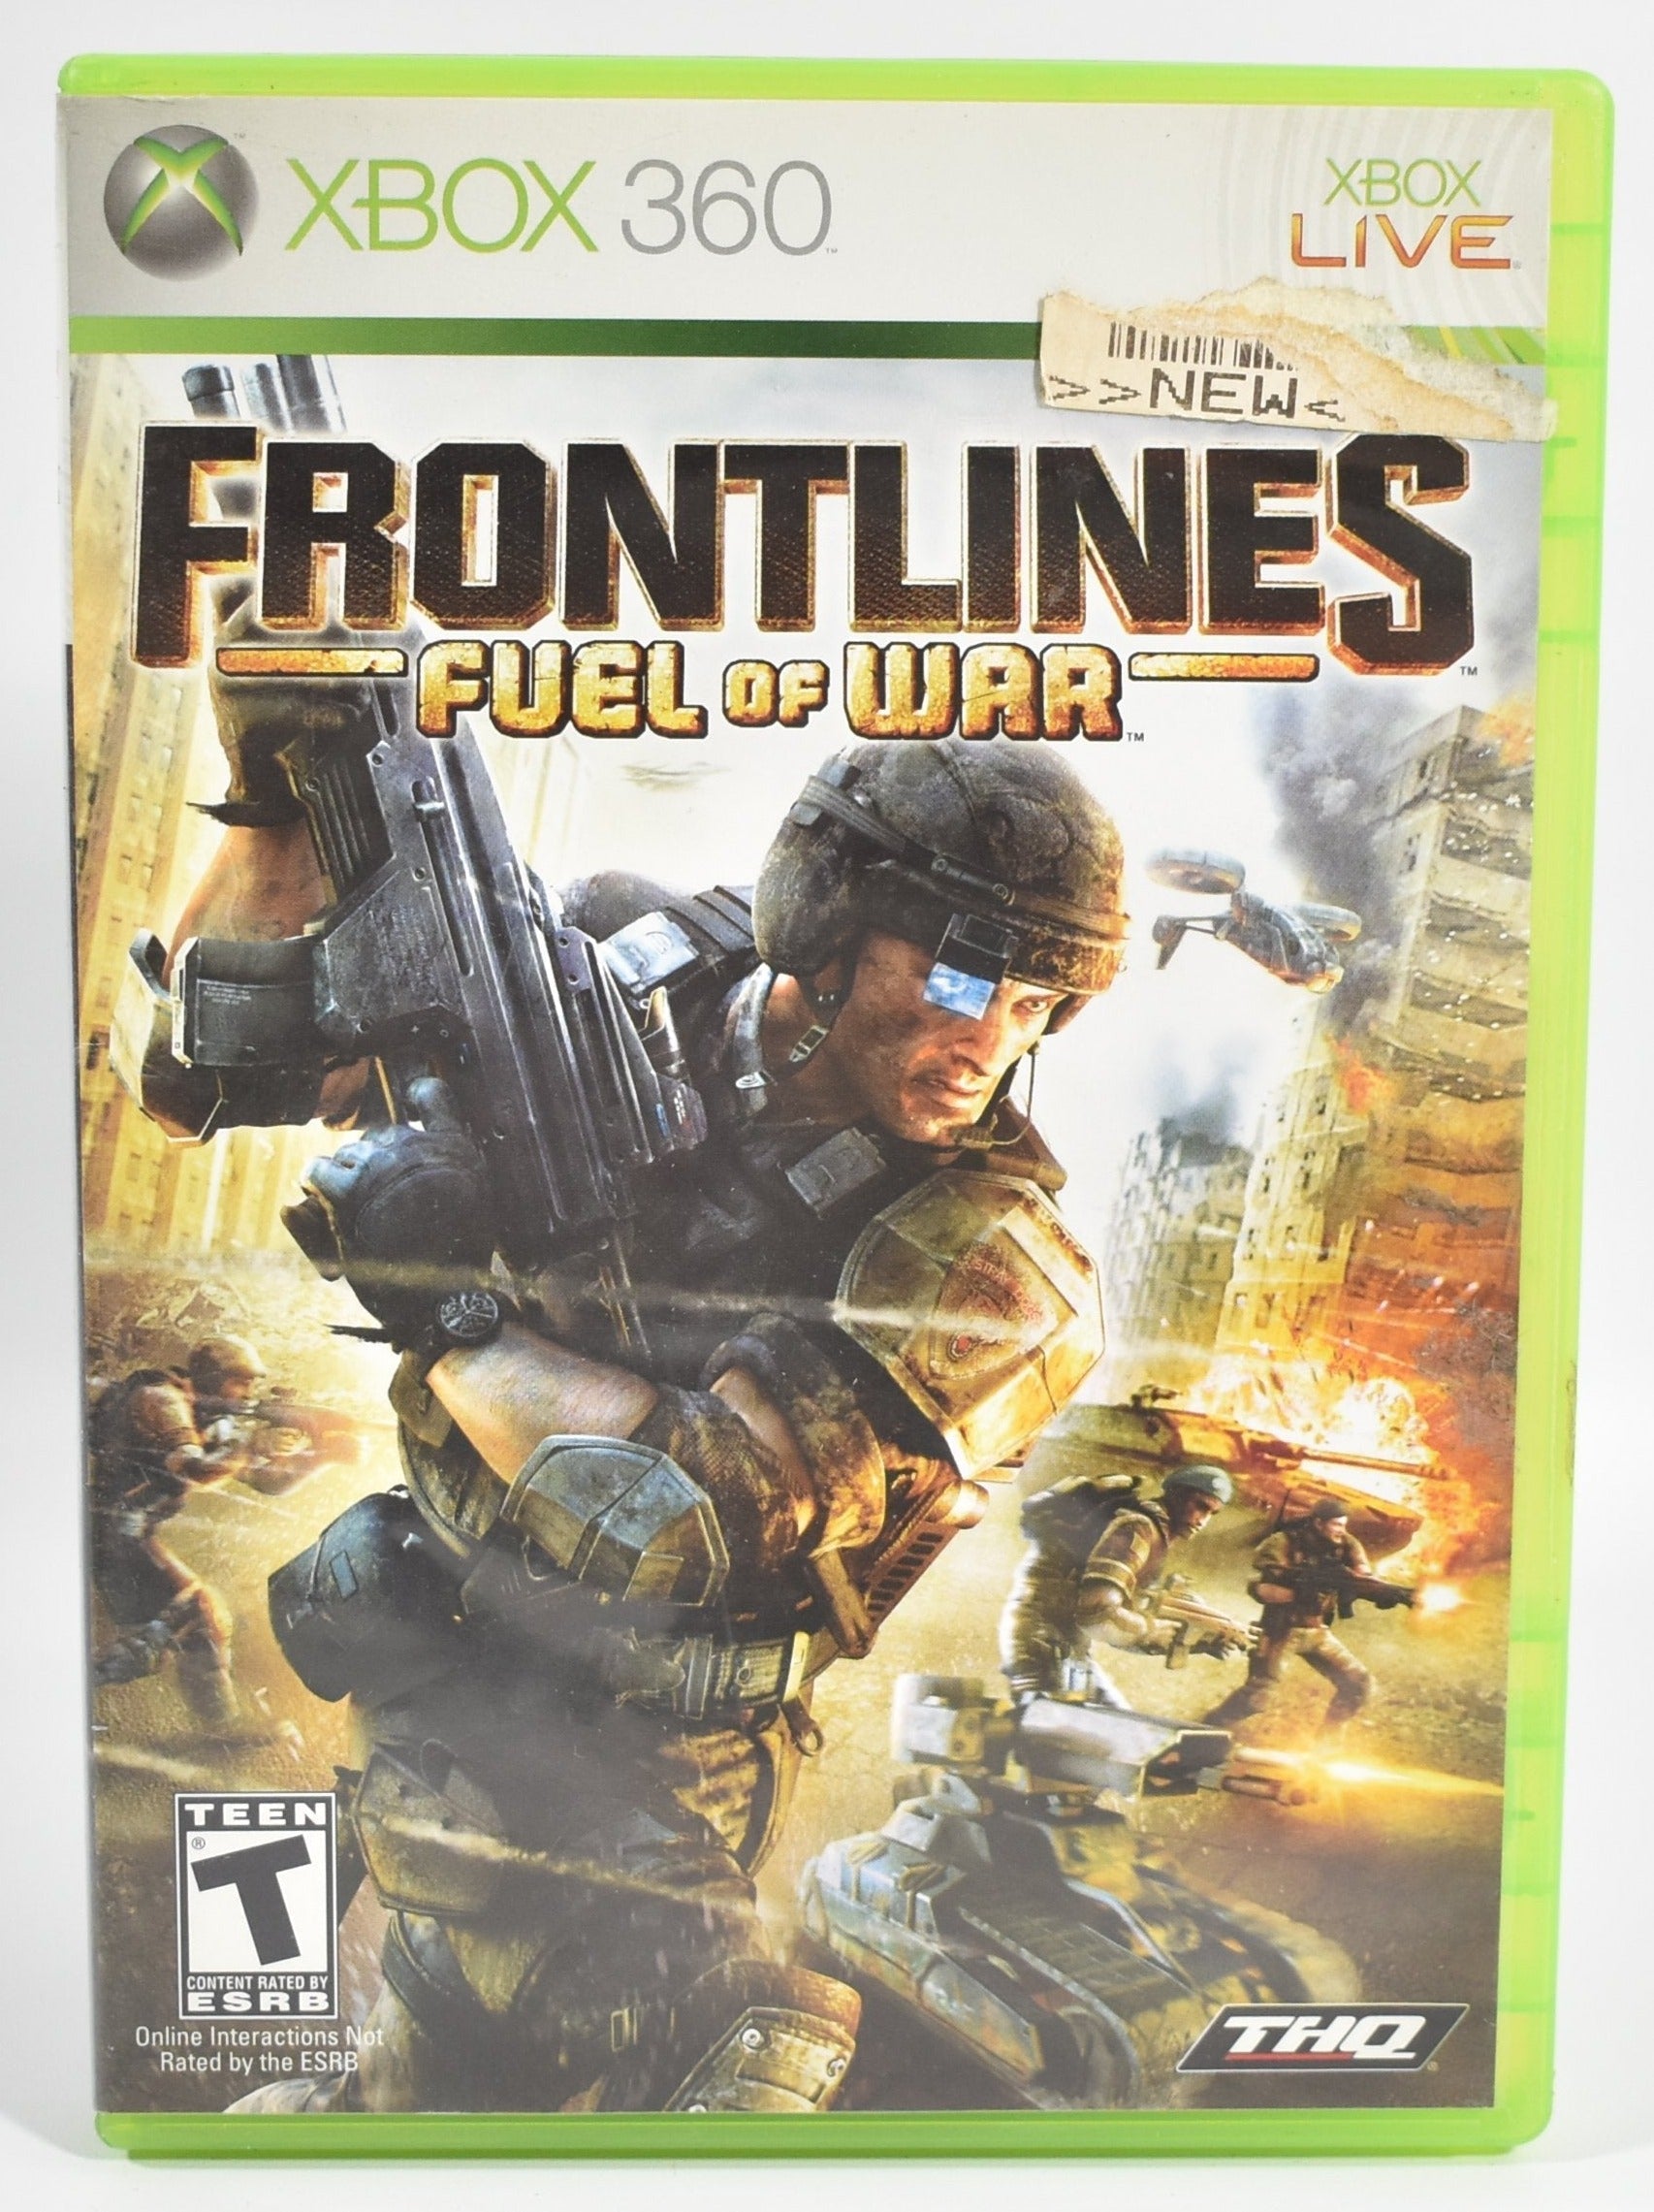 Xbox 360 Video Game Front Lines Fuel of War Game Used